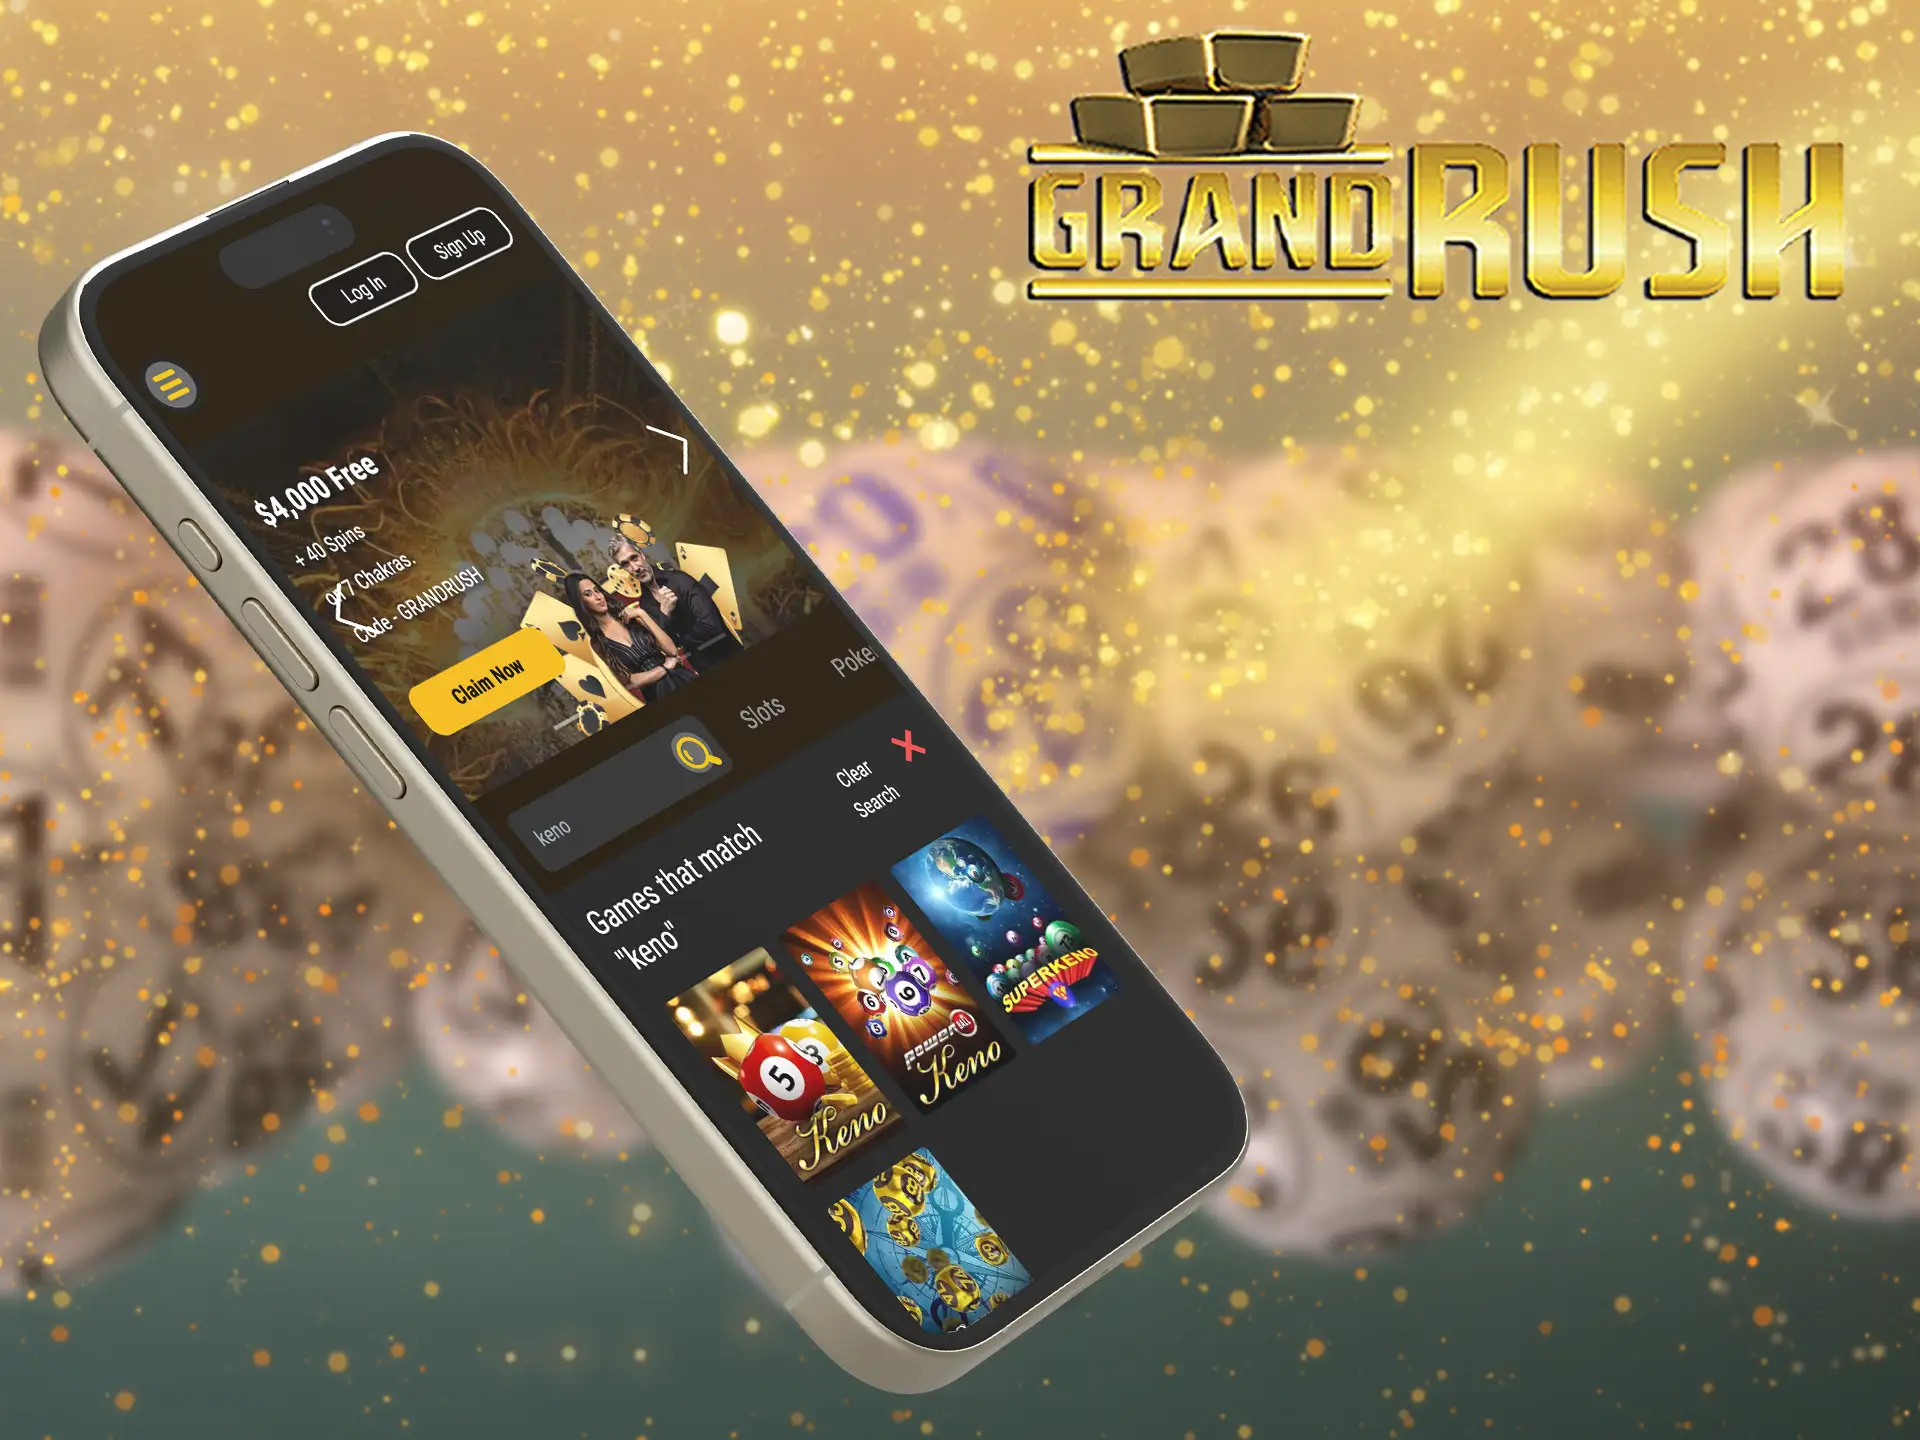 Use a mobile website to play Grand Rush Keno games on your phone.